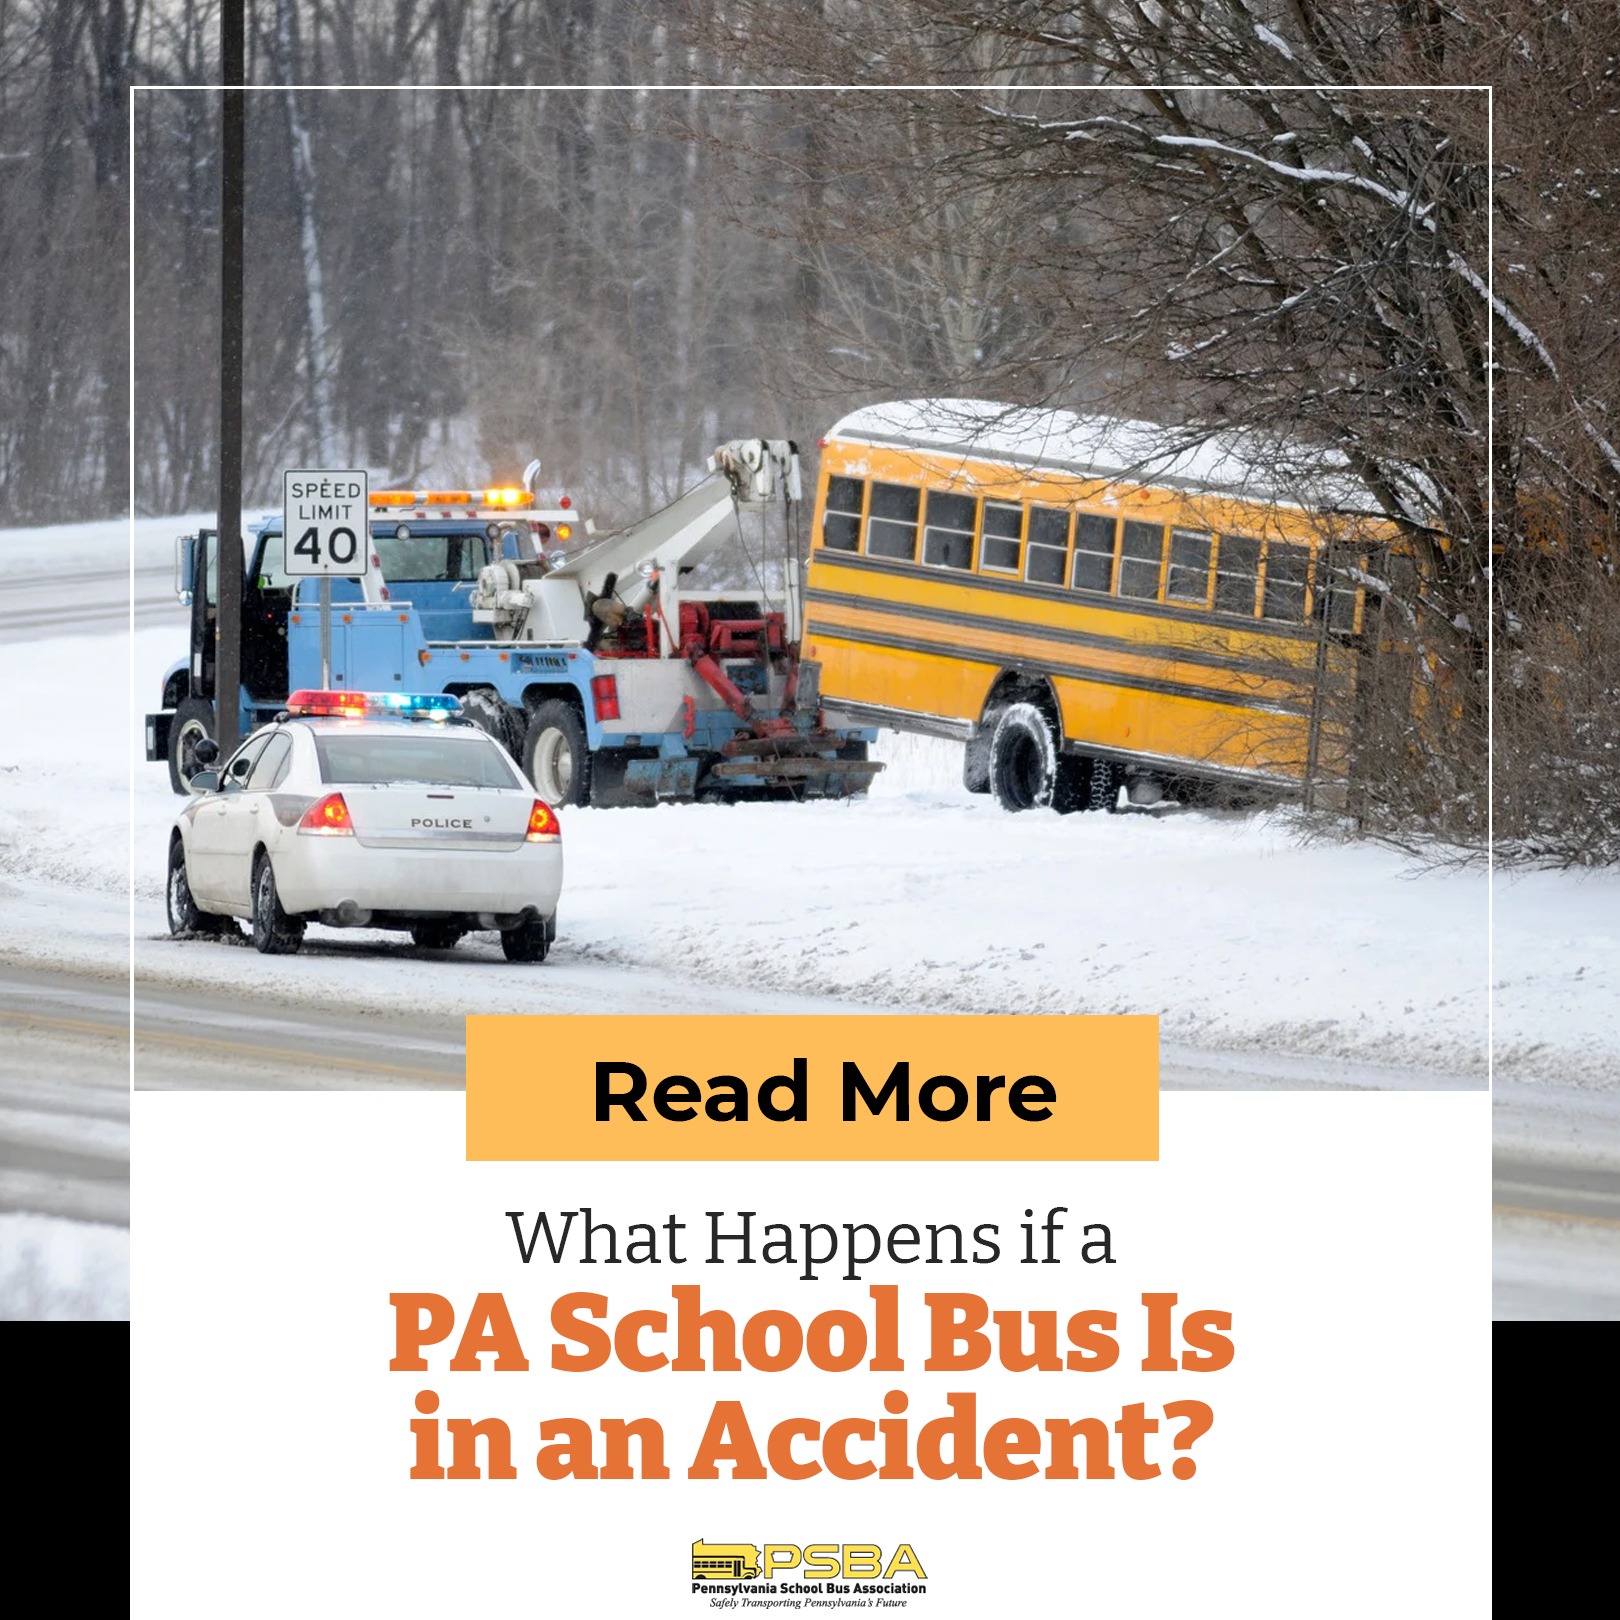 What Happens If a PA School Bus Is in an Accident?